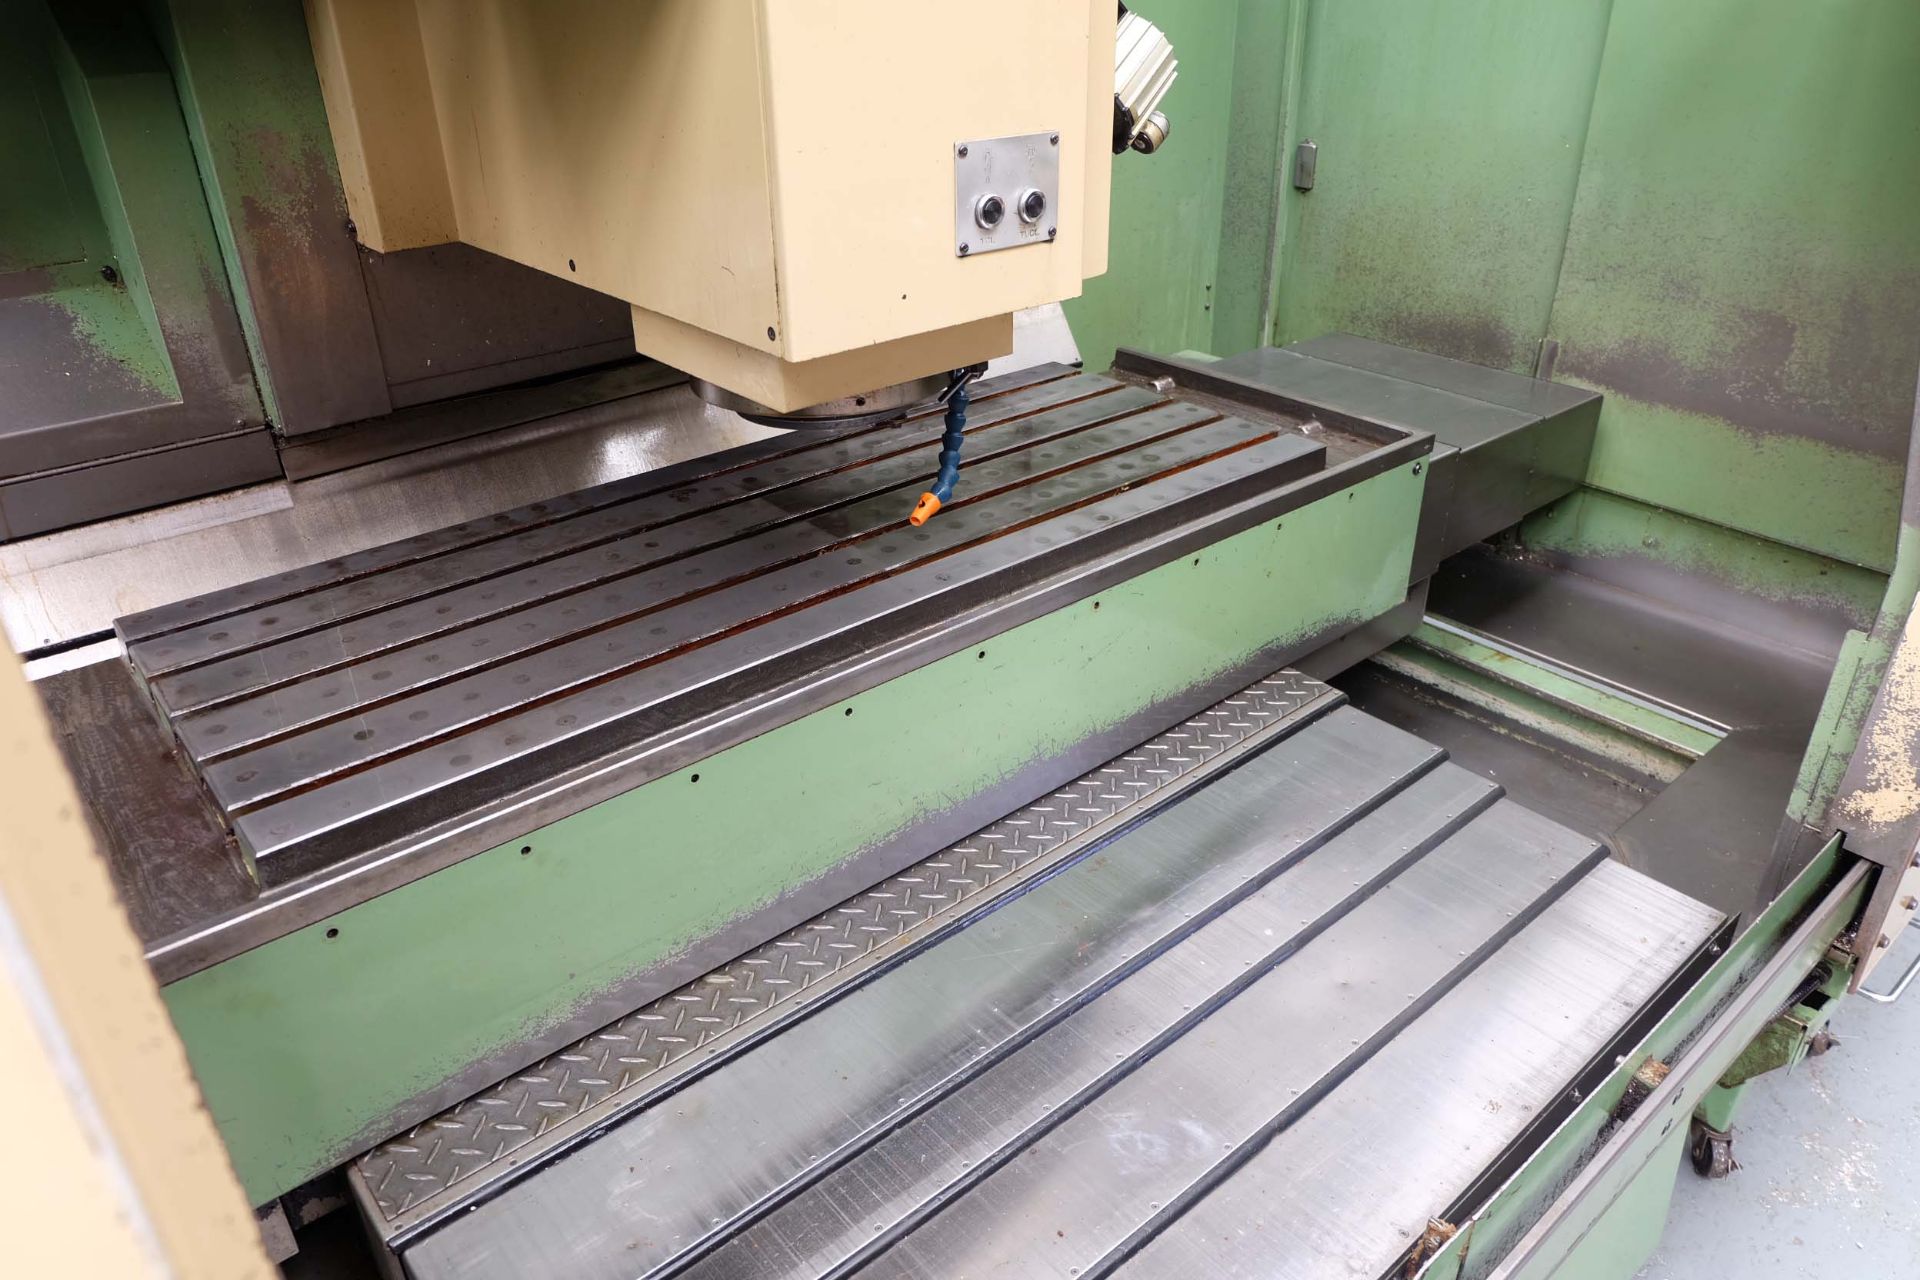 Mori-Seiki MV55/40 Vertical Machining Centre With Fanuc 10MA Control. Table Size: 1400 x 550mm. - Image 7 of 26